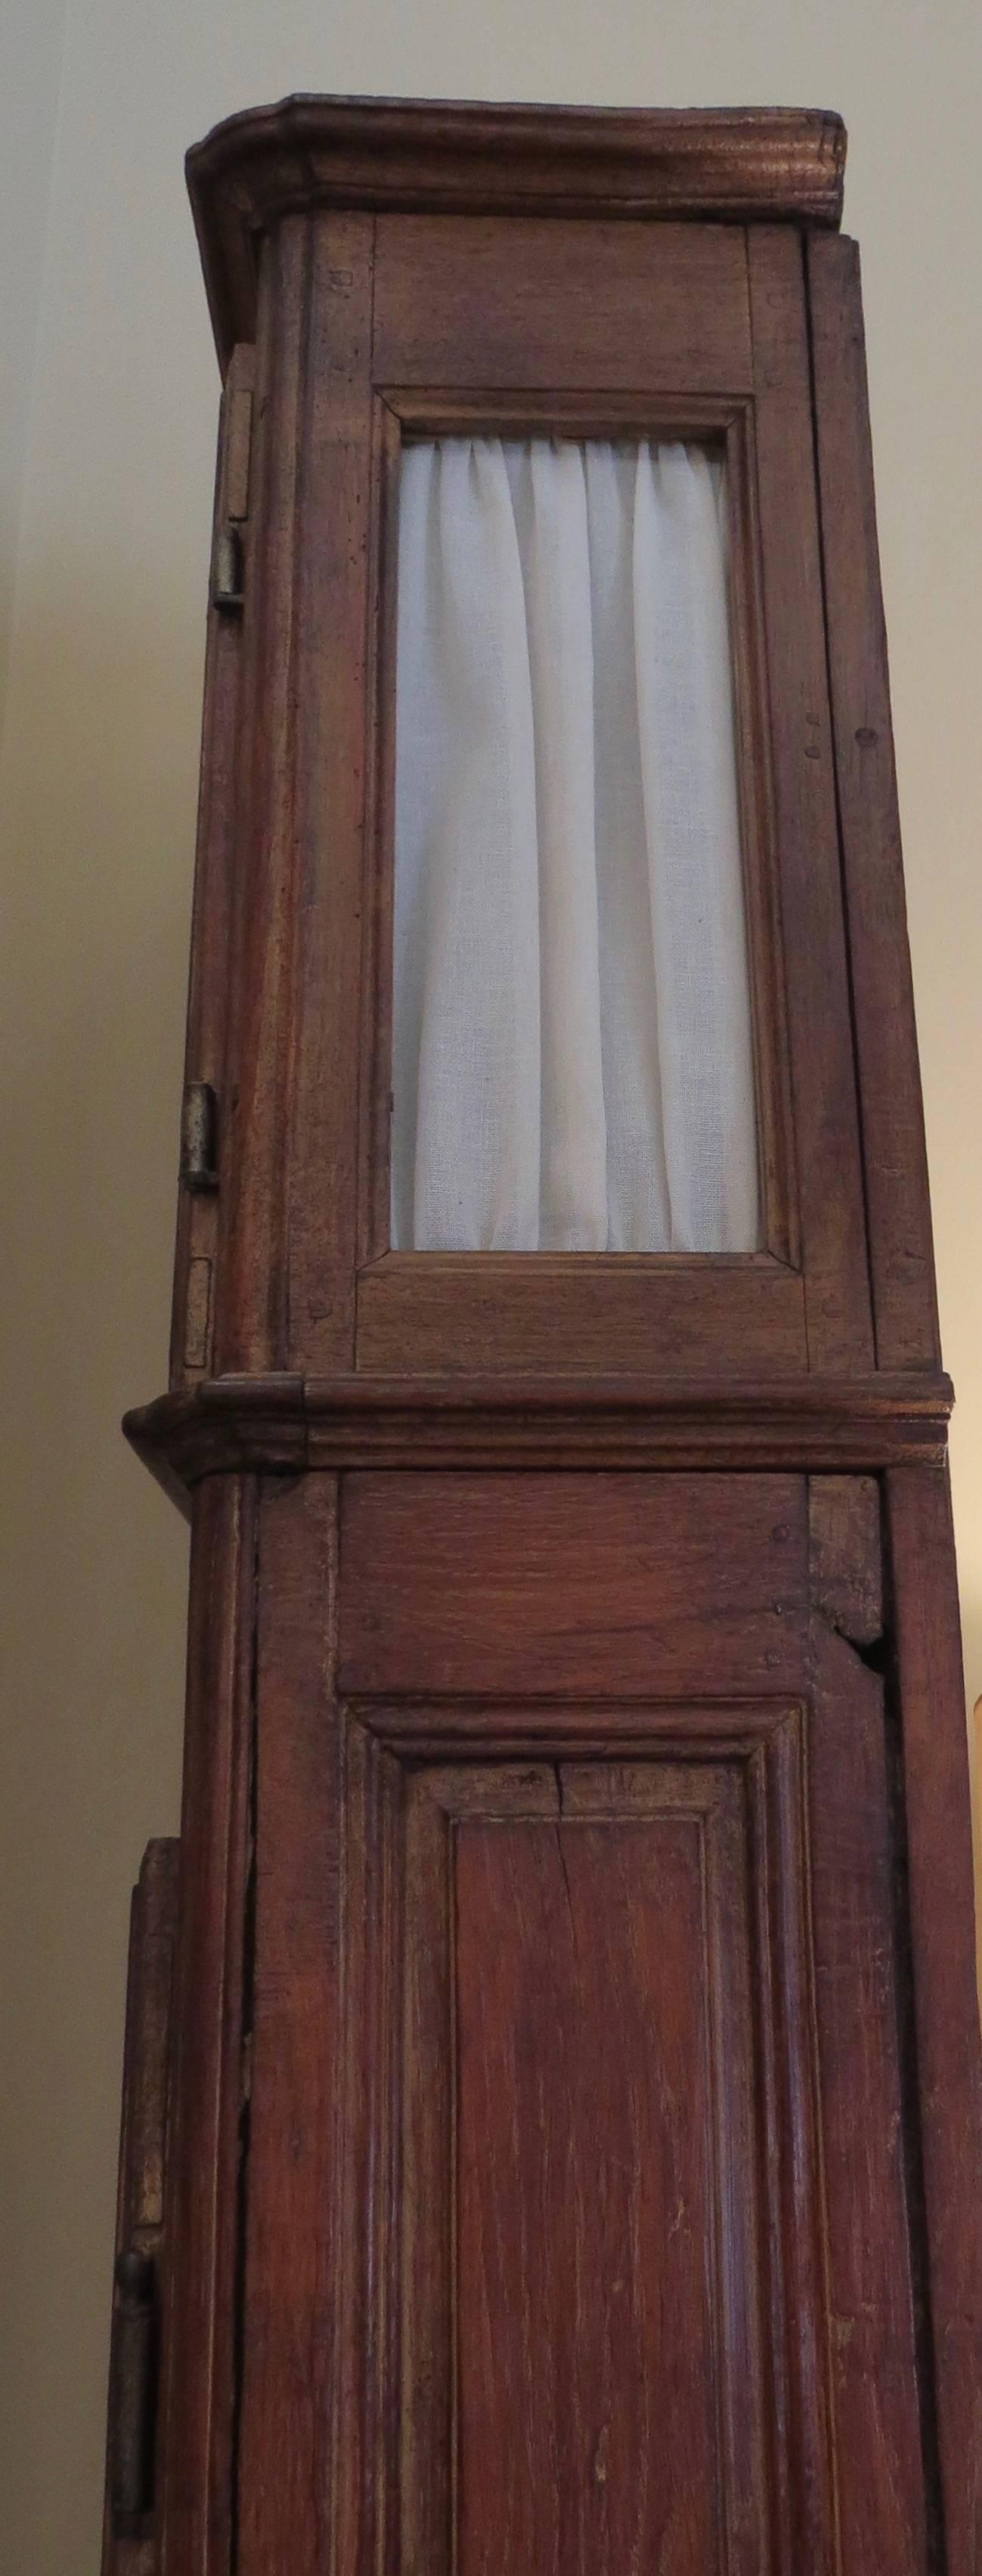 This tall, French oak clock case was made in the 19th century. A quartz movement and 20th century face with coq wreath adornment have been added. Fabric panels soften the glass windows on the sides of the clock housing. The front panel is a door